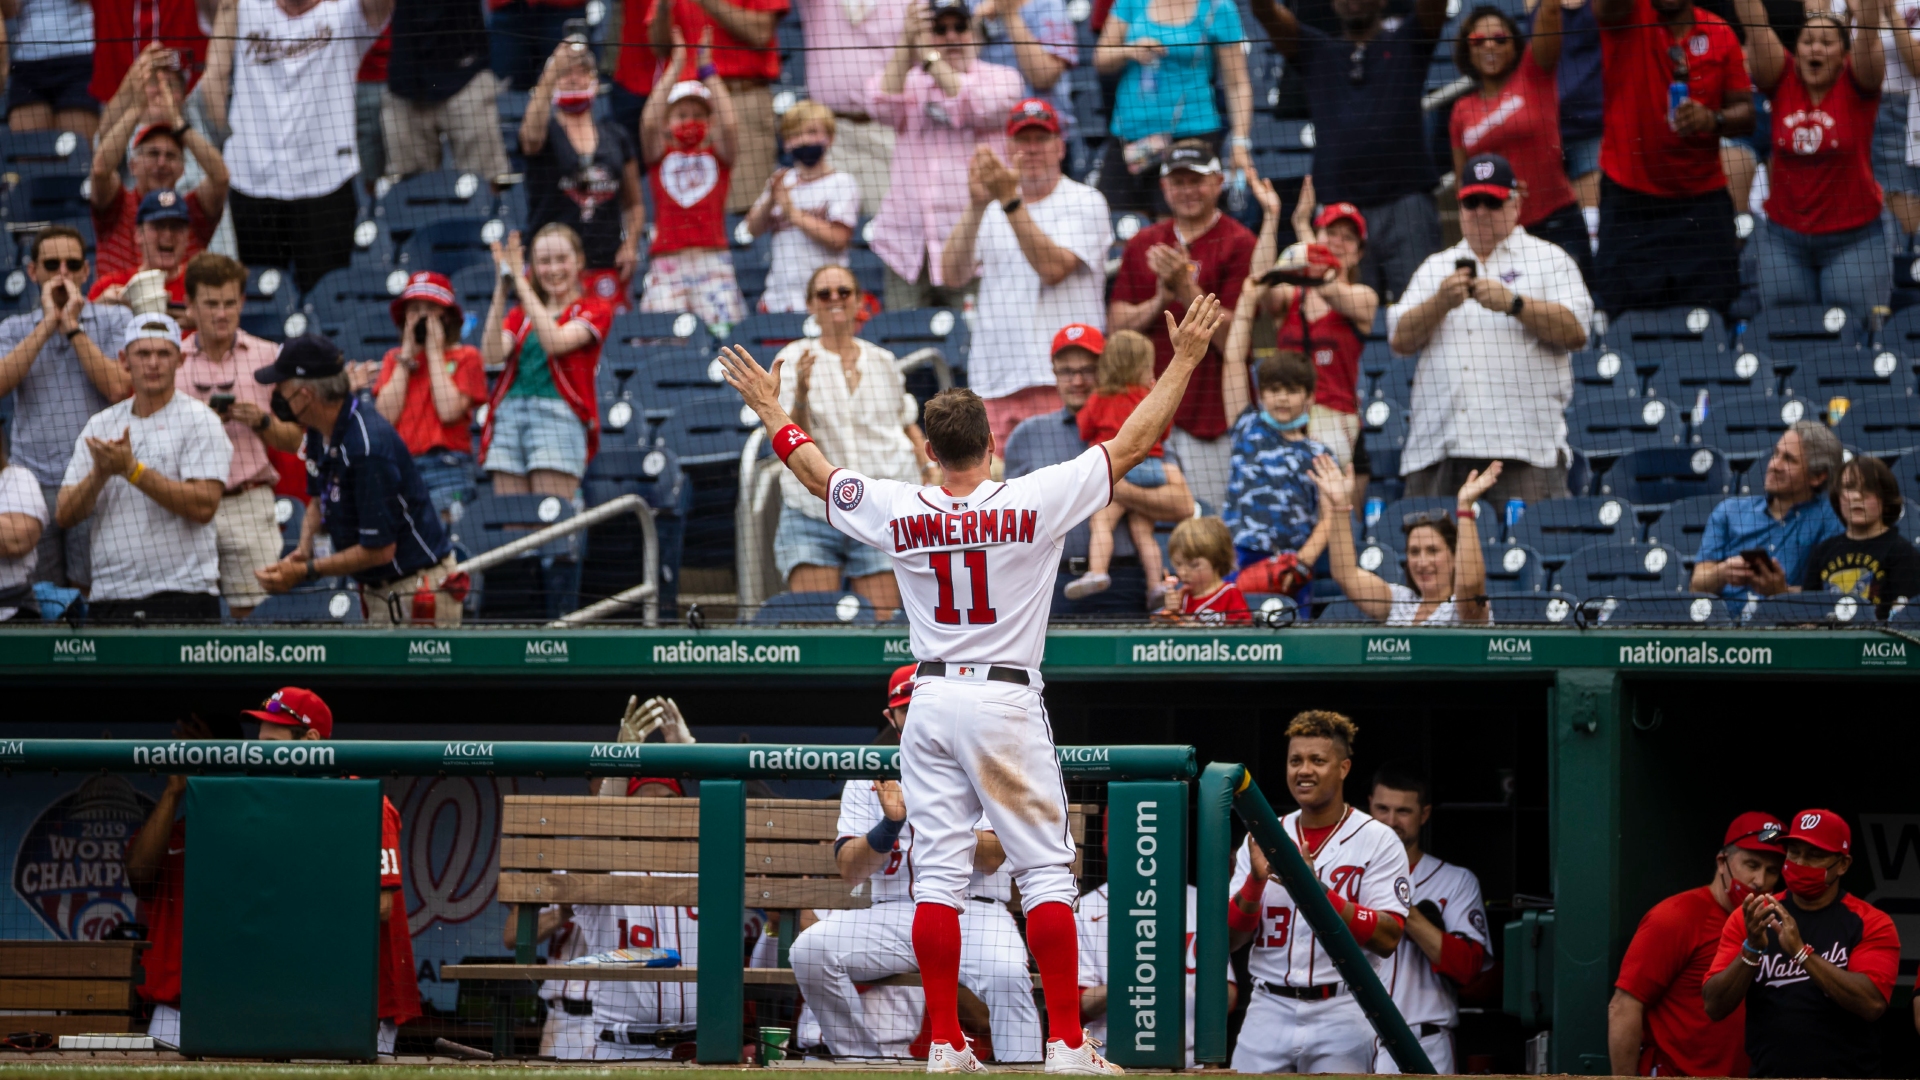 Nationals fans give Ryan Zimmerman a standing ovation